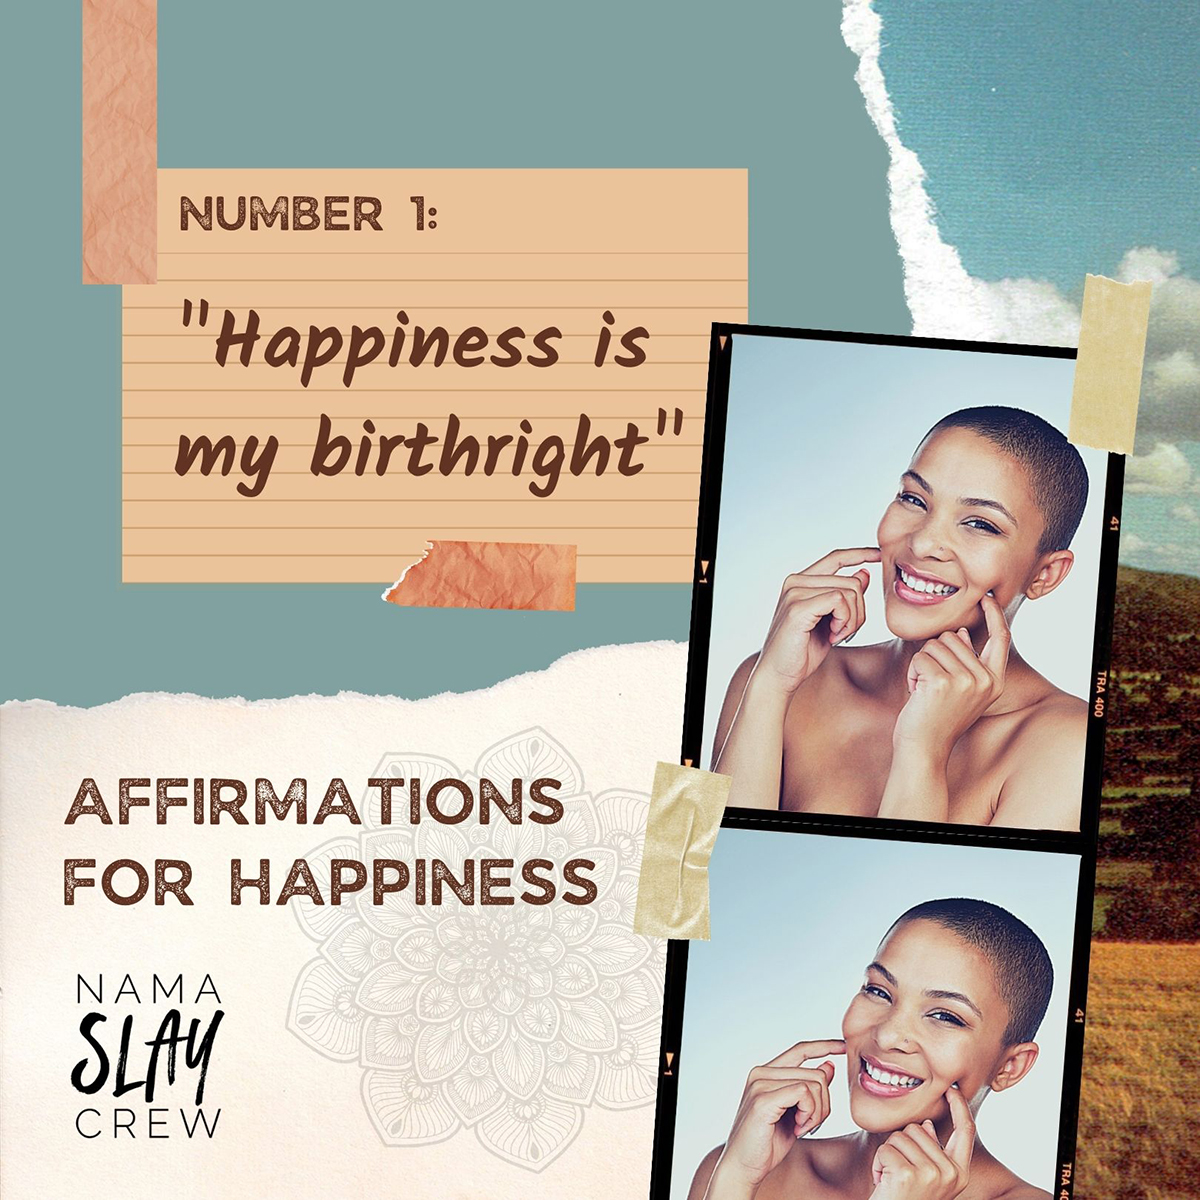 Happiness is my birthright